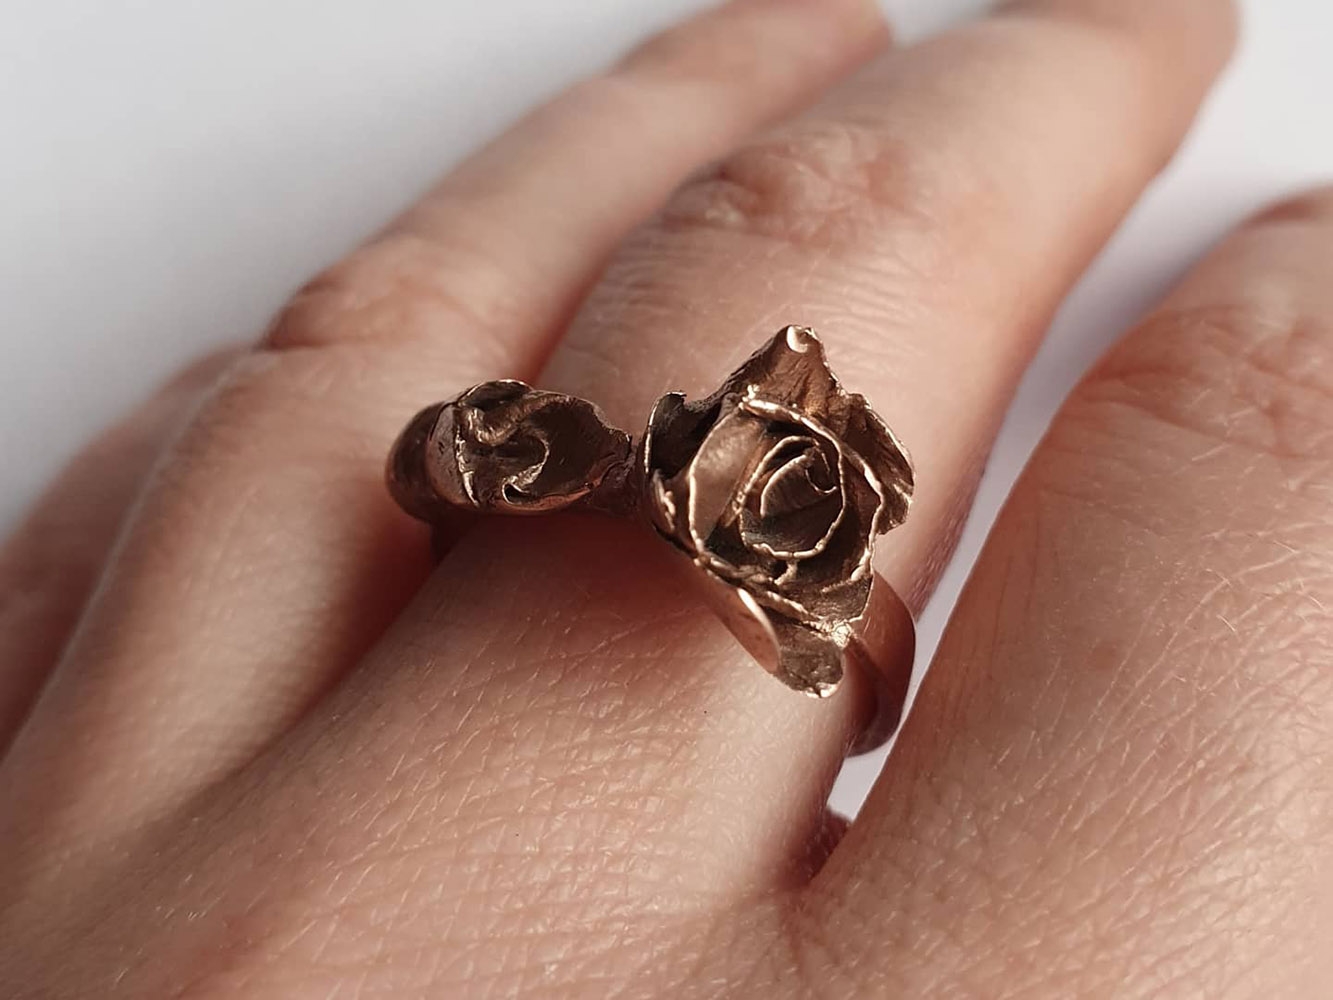 Copper rose-shaped ring worn on a hand